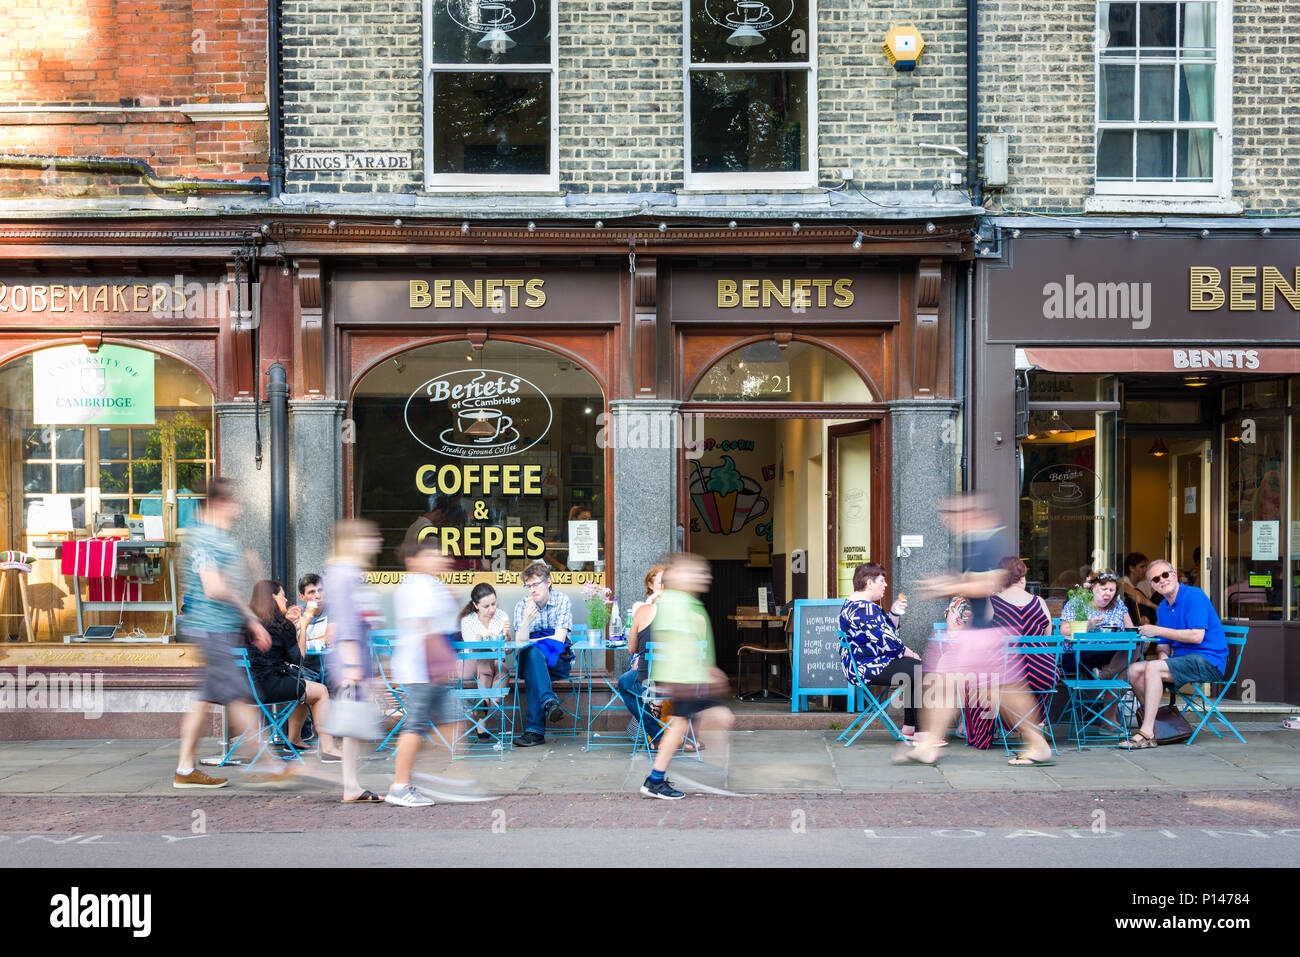 People sitting outside Benets coffee shop as well as walking past on the pavement, Kings Parade, Cambridge, UK Stock Photo